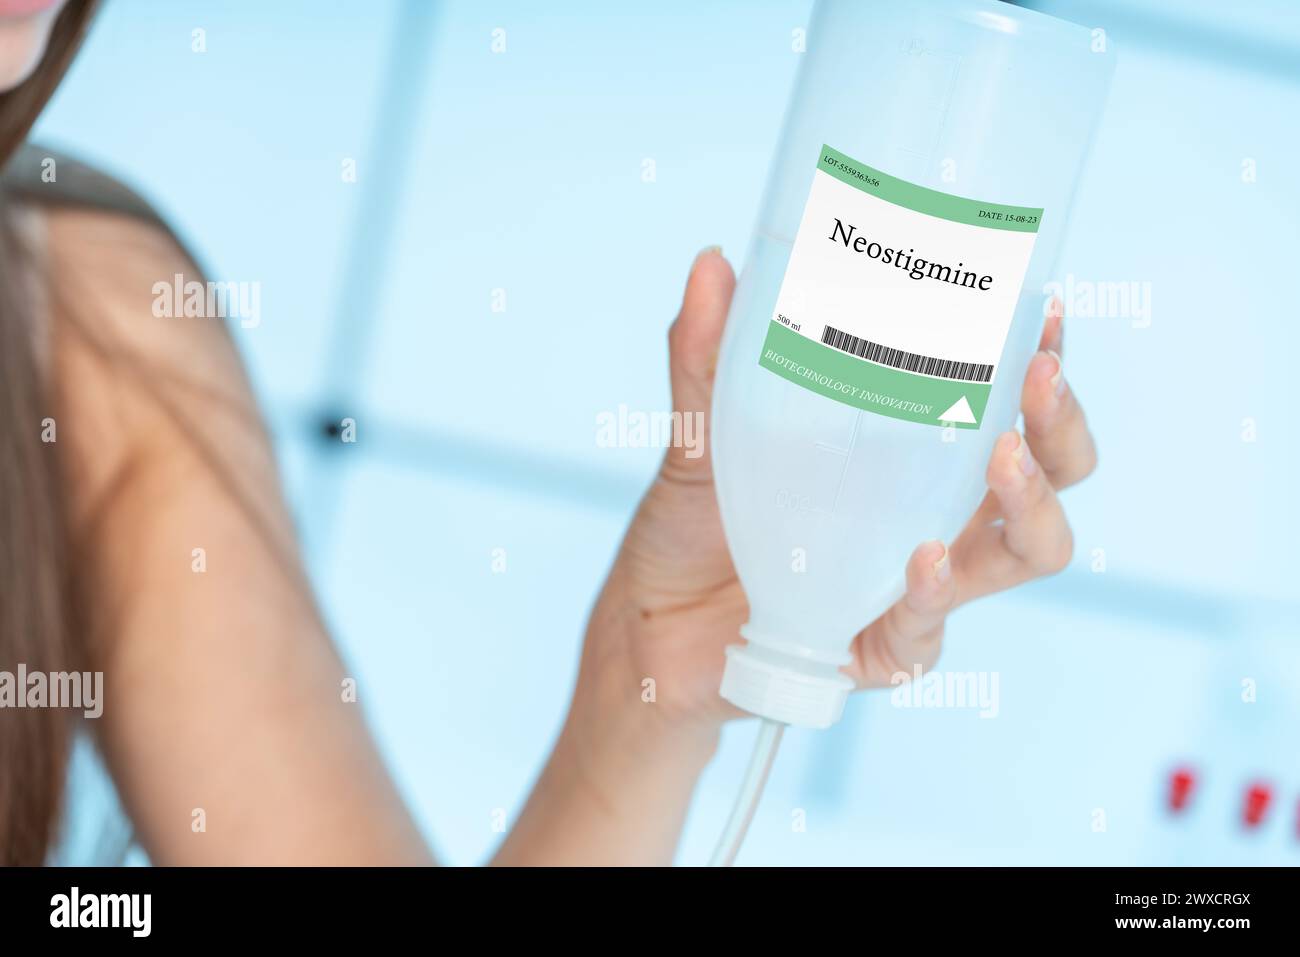 Neostigmine intravenous solution, conceptual image. A medication used to reverse the effects of neuromuscular blocking agents. Stock Photo